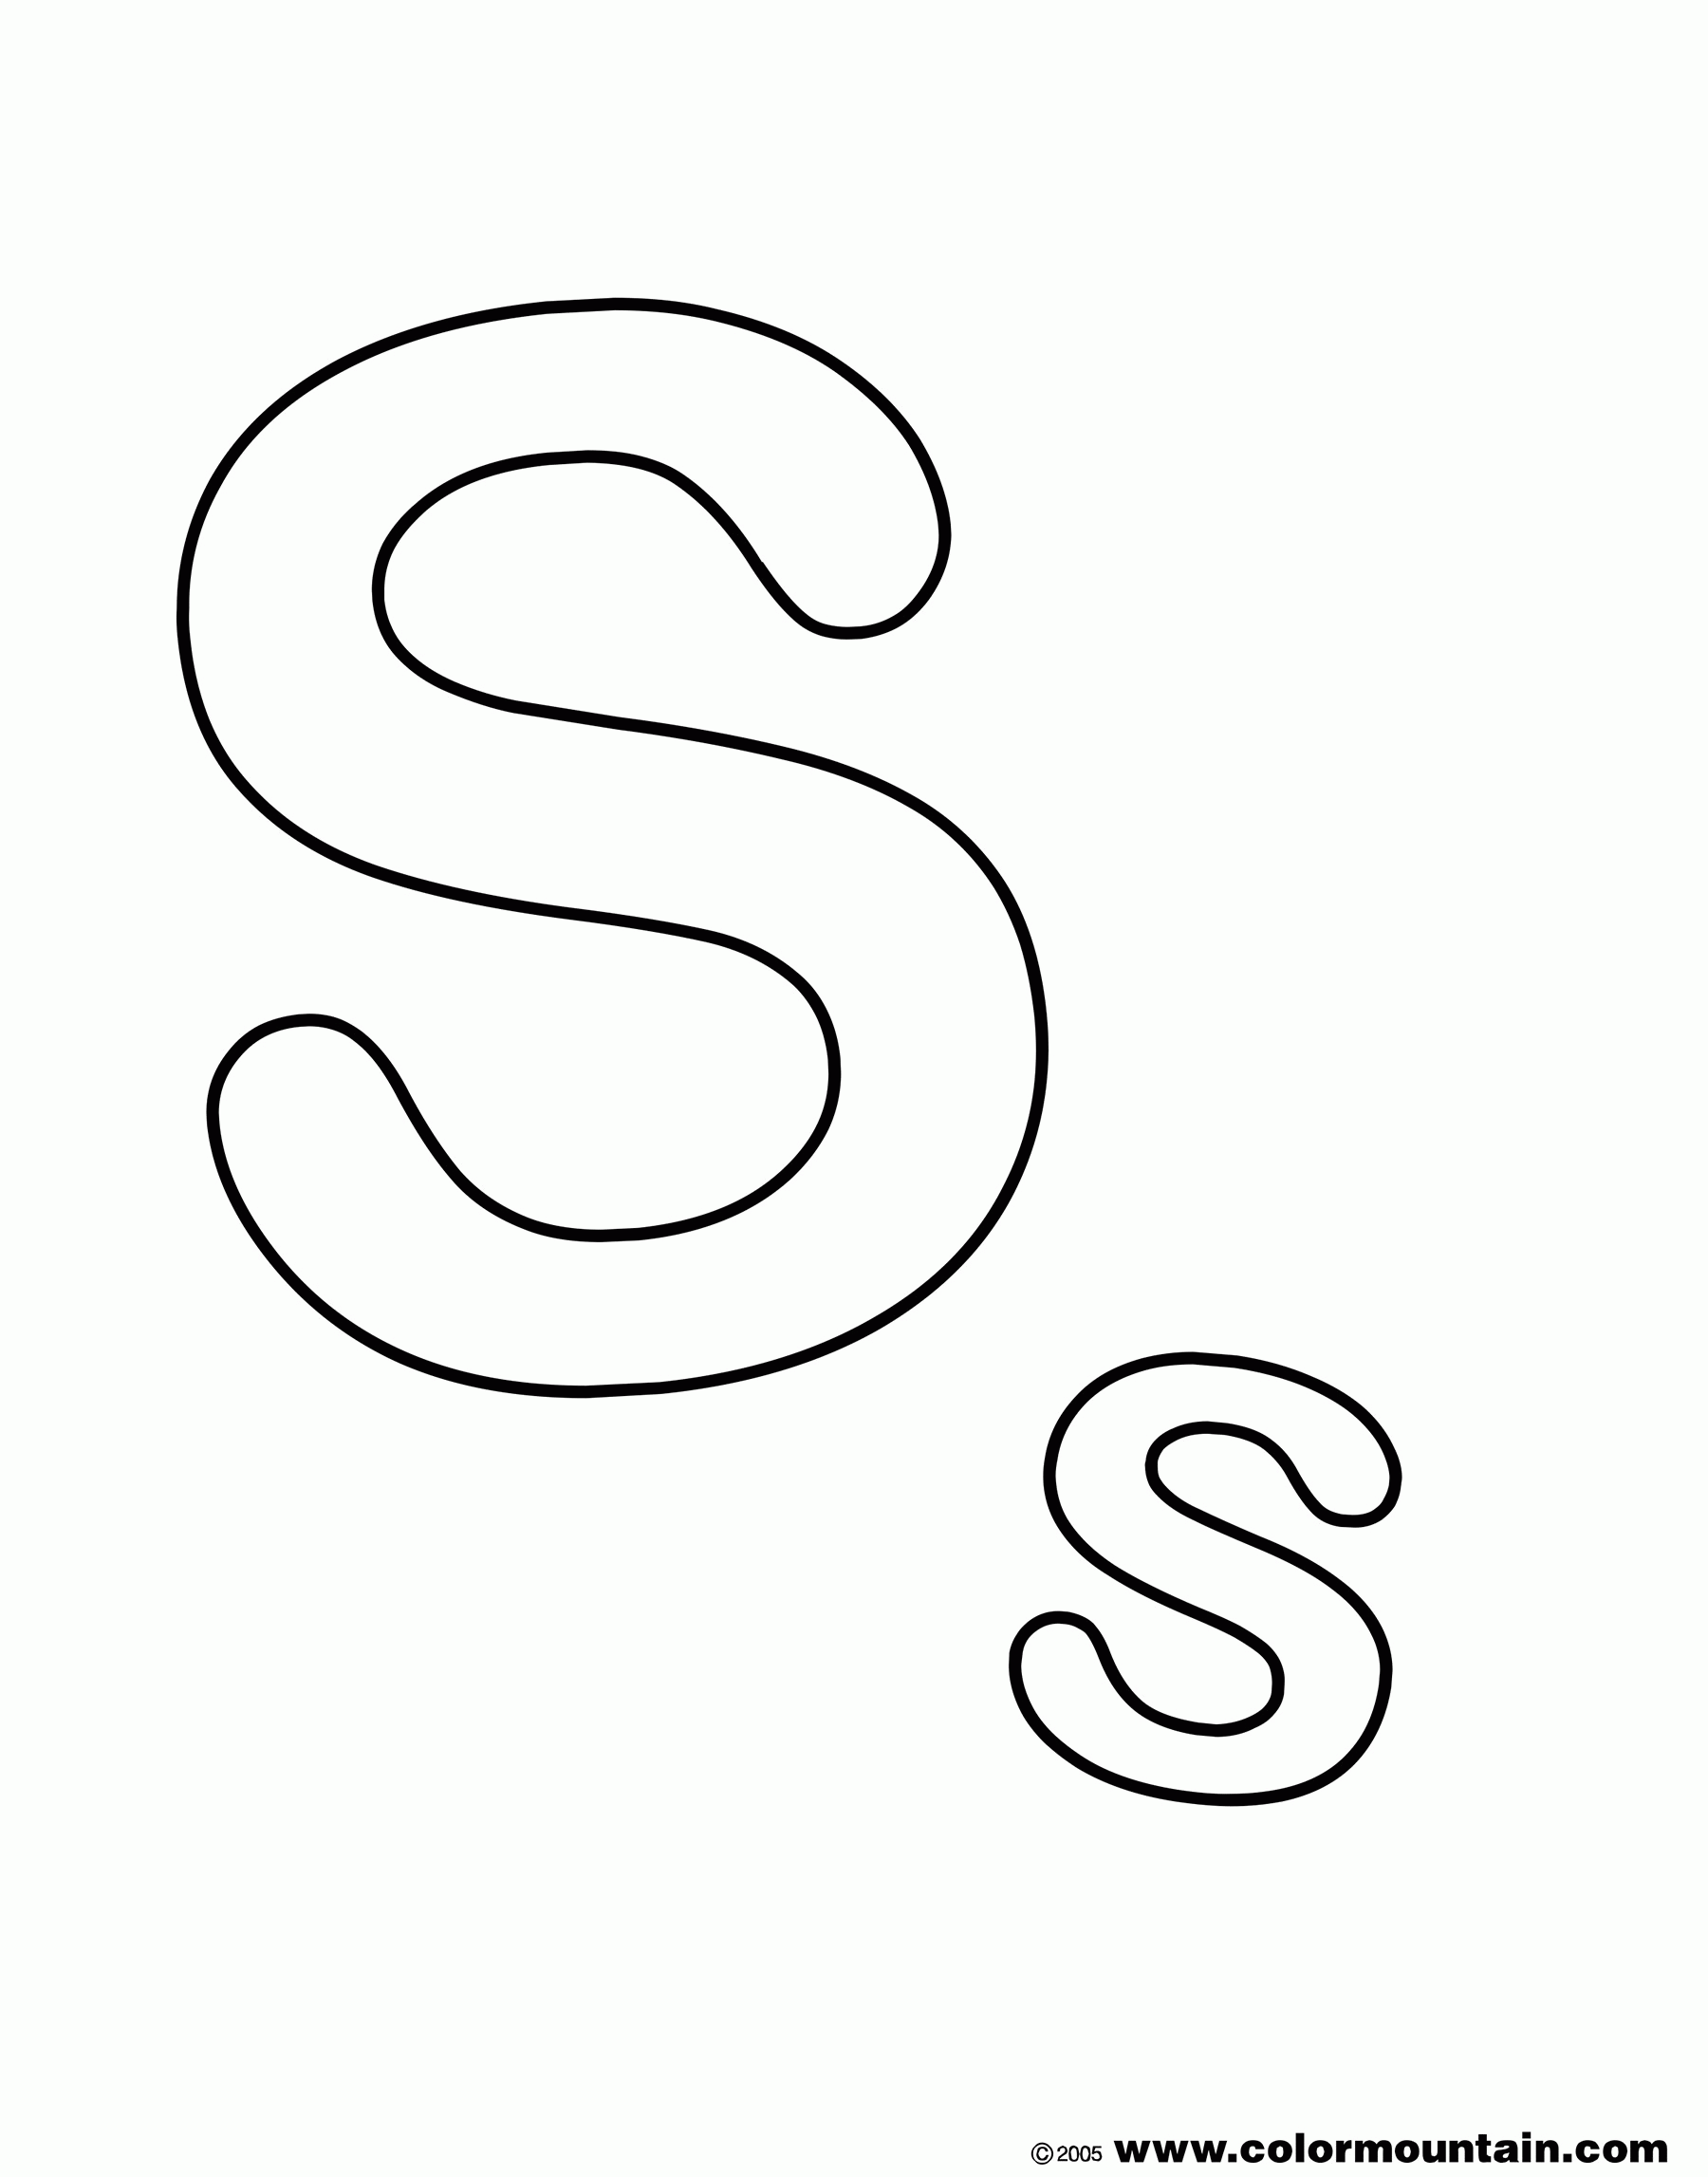 Letter S Snake Coloring Page Letter S Coloring Sheets